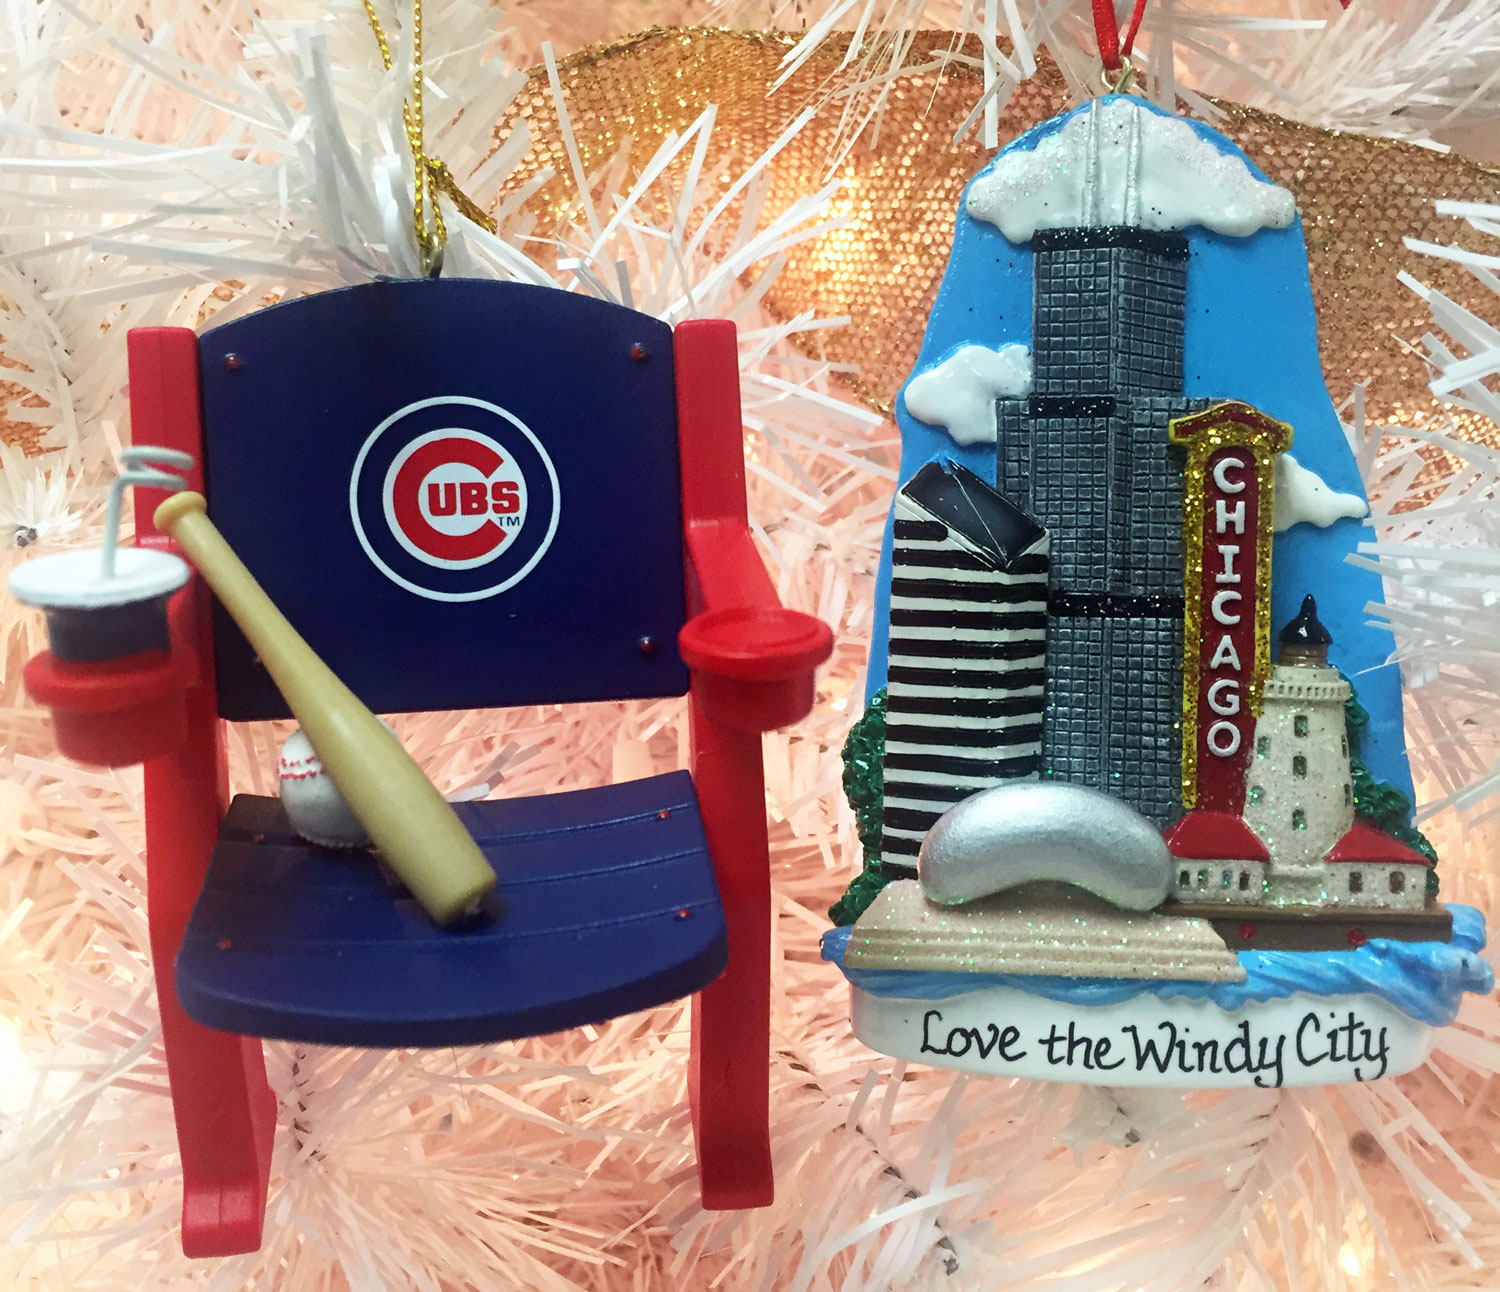 Celebrate Travel Tuesday in Chicago, "the Windy City," with the Cubs and our team | OrnamentShop.com